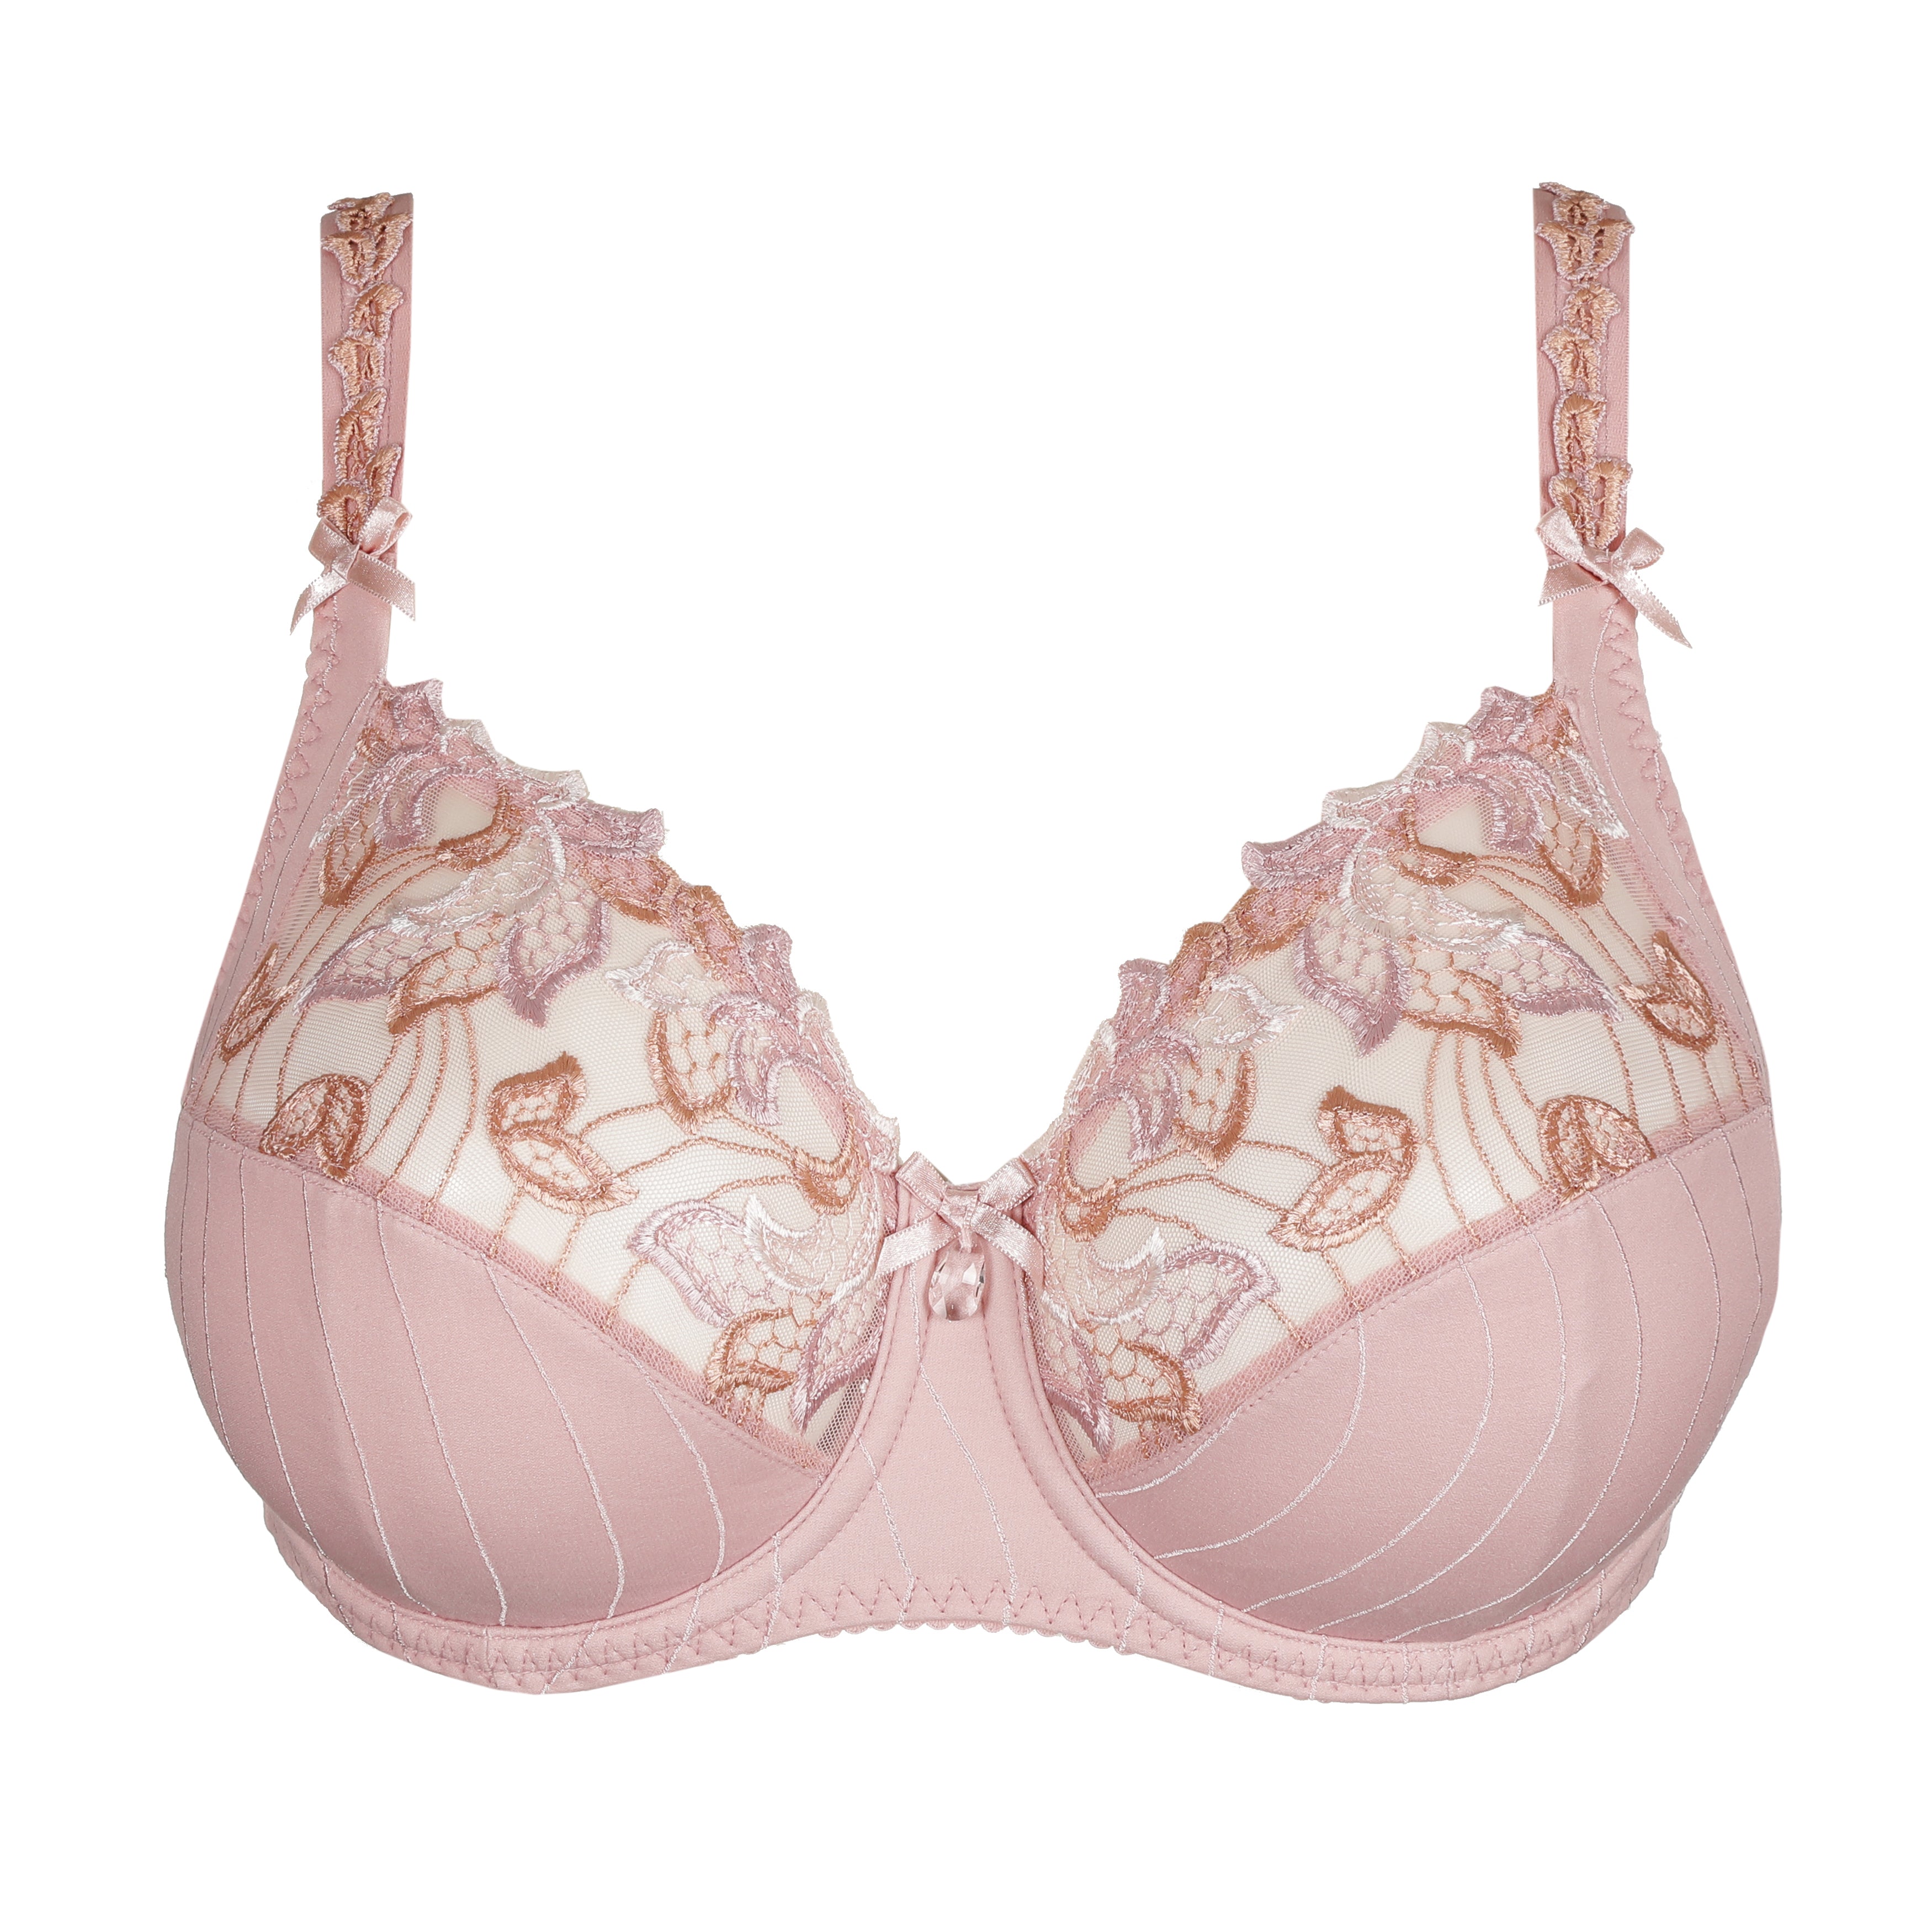 Prima Donna Deauville Full Cup Bra - Vintage Pink (Limited Edition) – Lily  Pad Lingerie